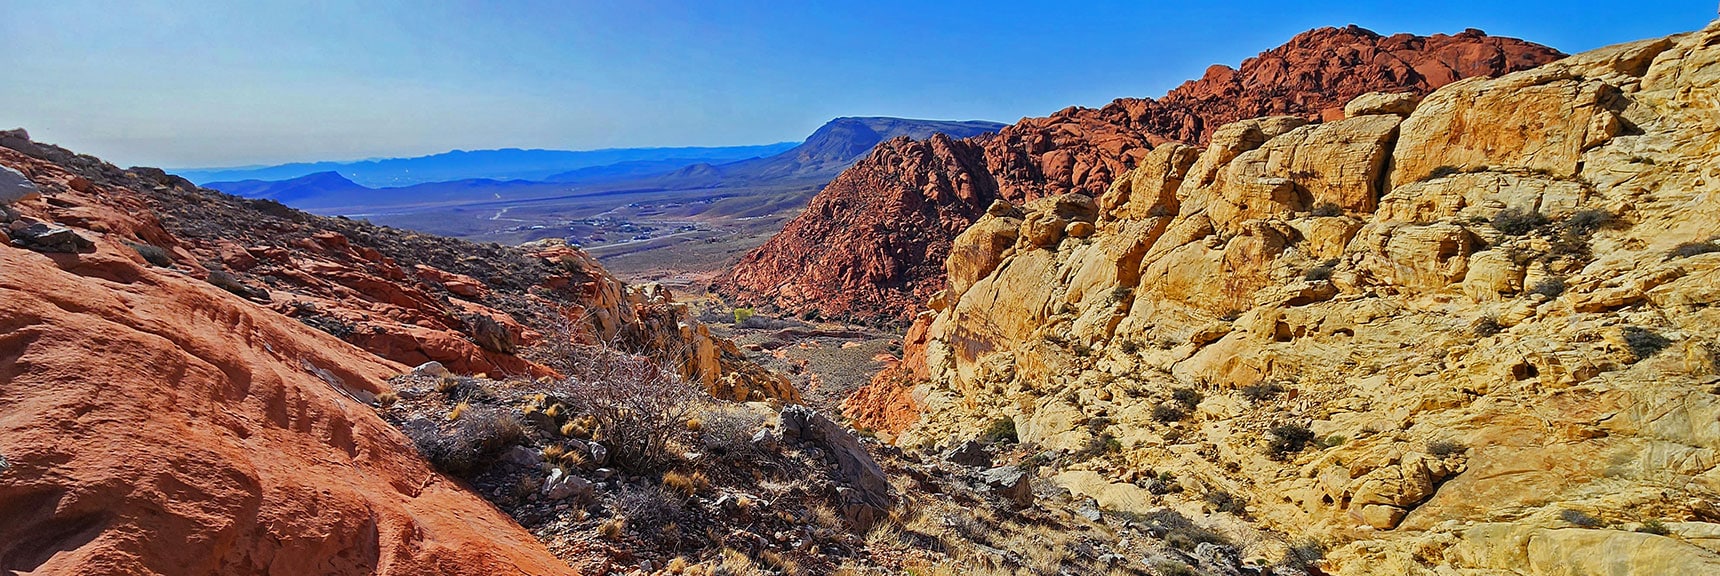 View Down Ash Canyon to Ash Spring, Calico Hills and Blue Diamond Hill. | Ash Canyon to Calico Tanks | Calico Basin and Red Rock Canyon, Nevada | David Smith | Las Vegas Area Trails